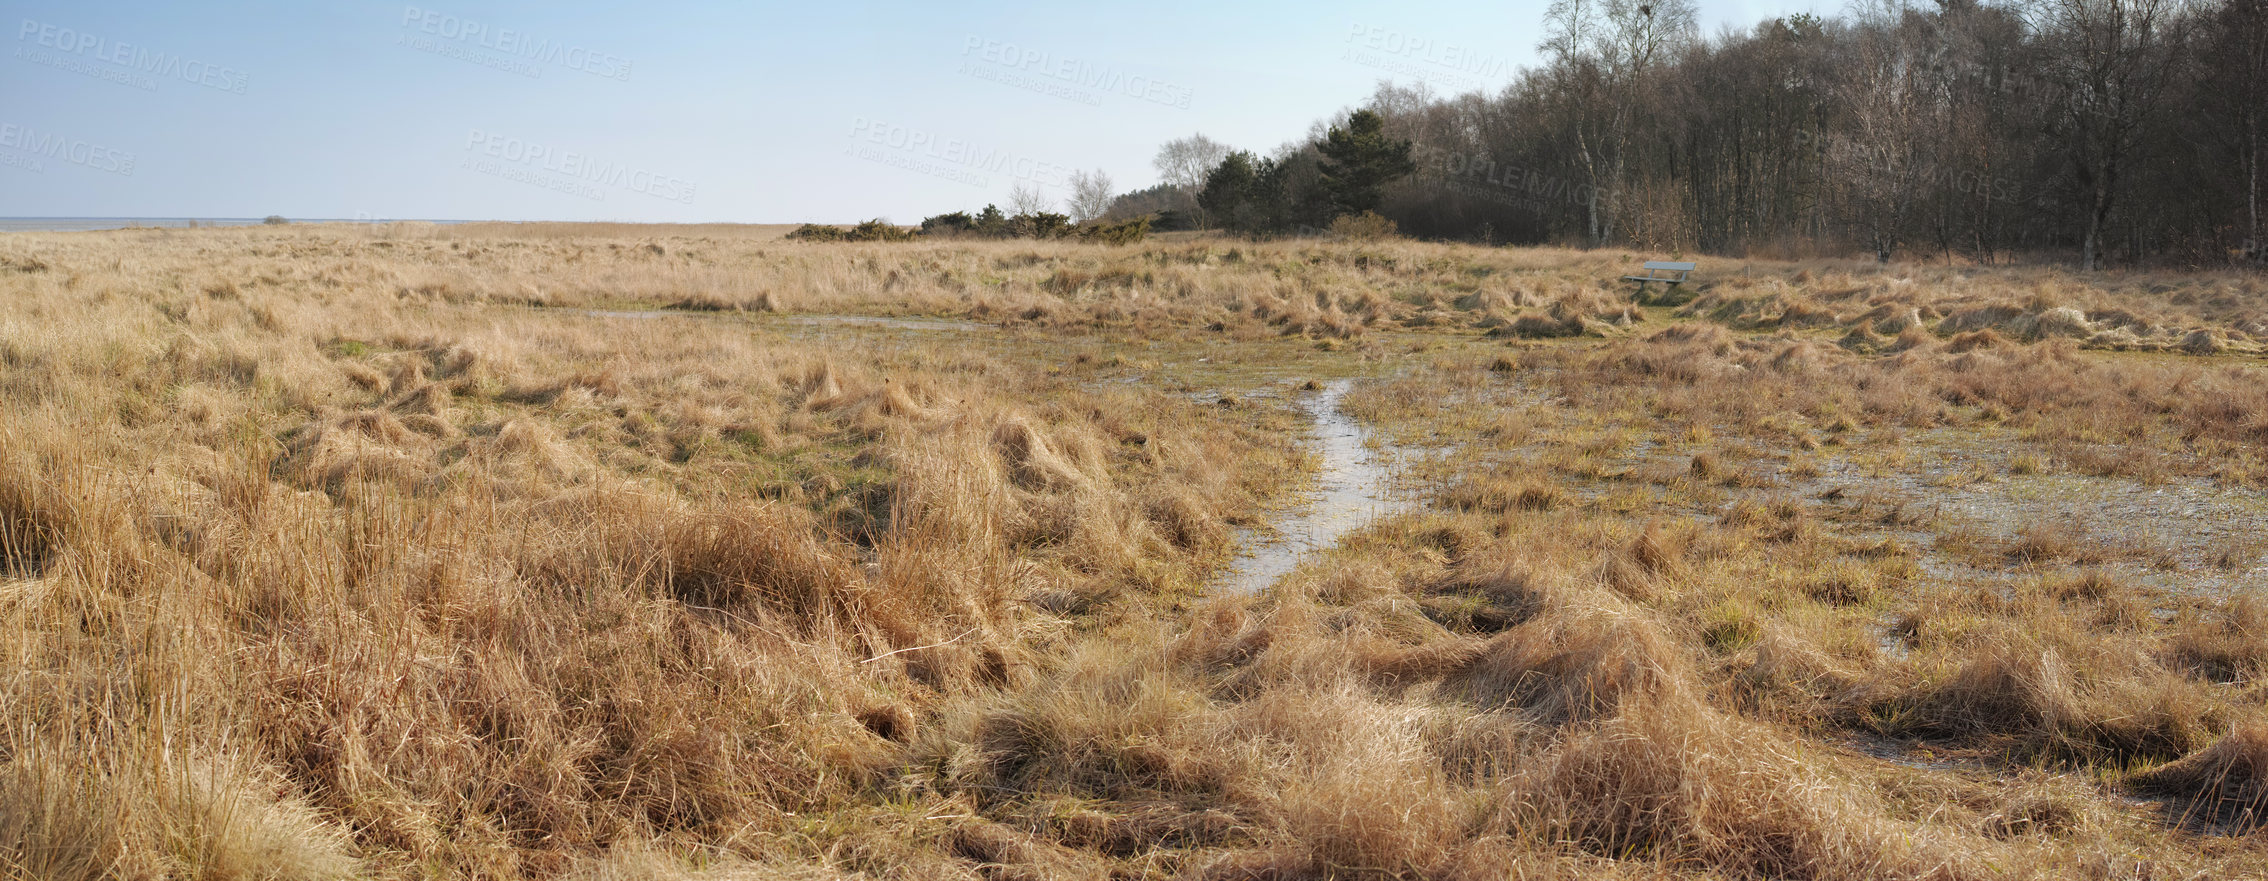 Buy stock photo Landscape of an empty and secluded uncultivated marshland against a blue sky. Swamp in a natural environment in the countryside for farming and cultivation in summer. Remote marsh setting in nature